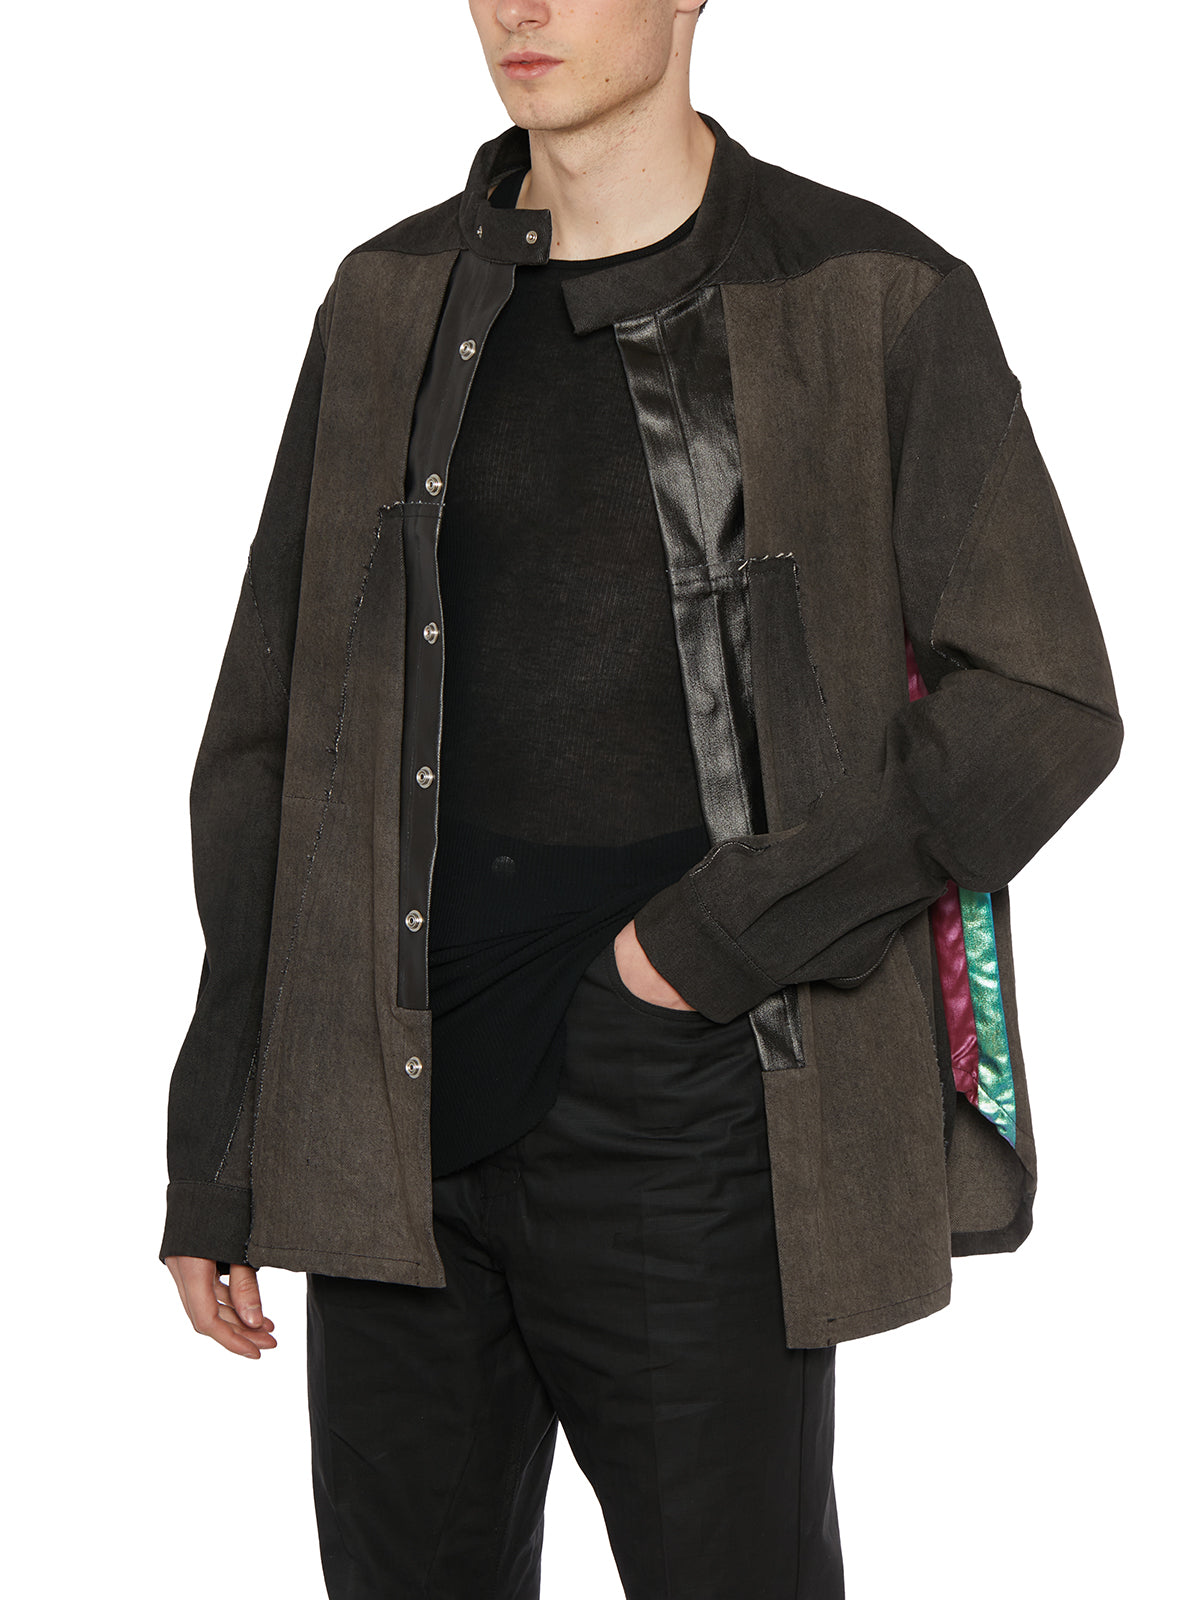 Black Cotton Splintered Outershirt Jacket - SS23 Collection